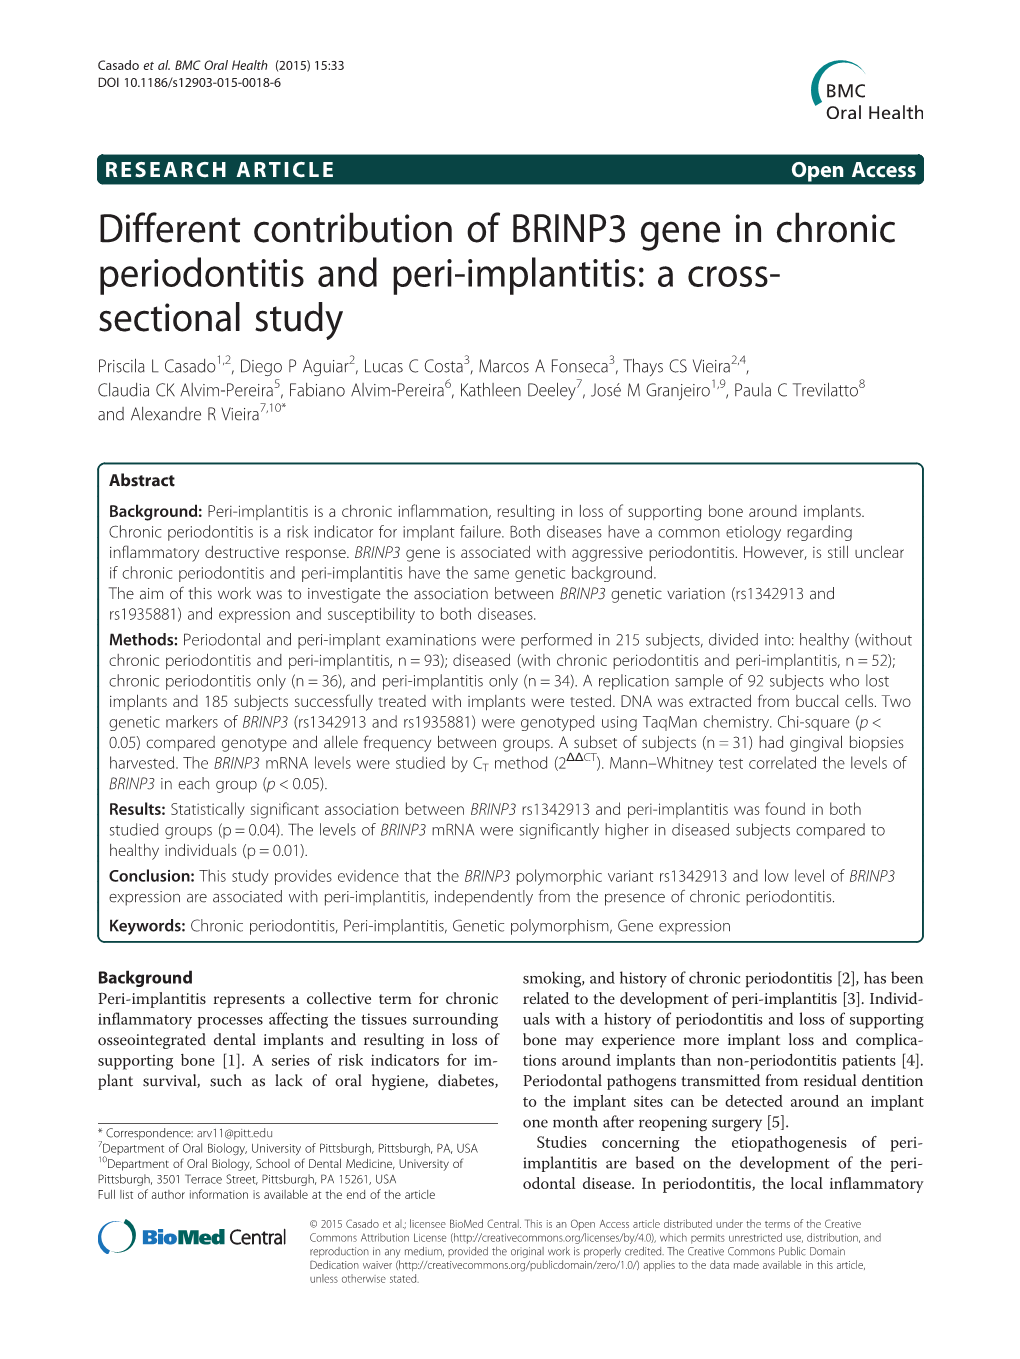 Different Contribution of BRINP3 Gene in Chronic